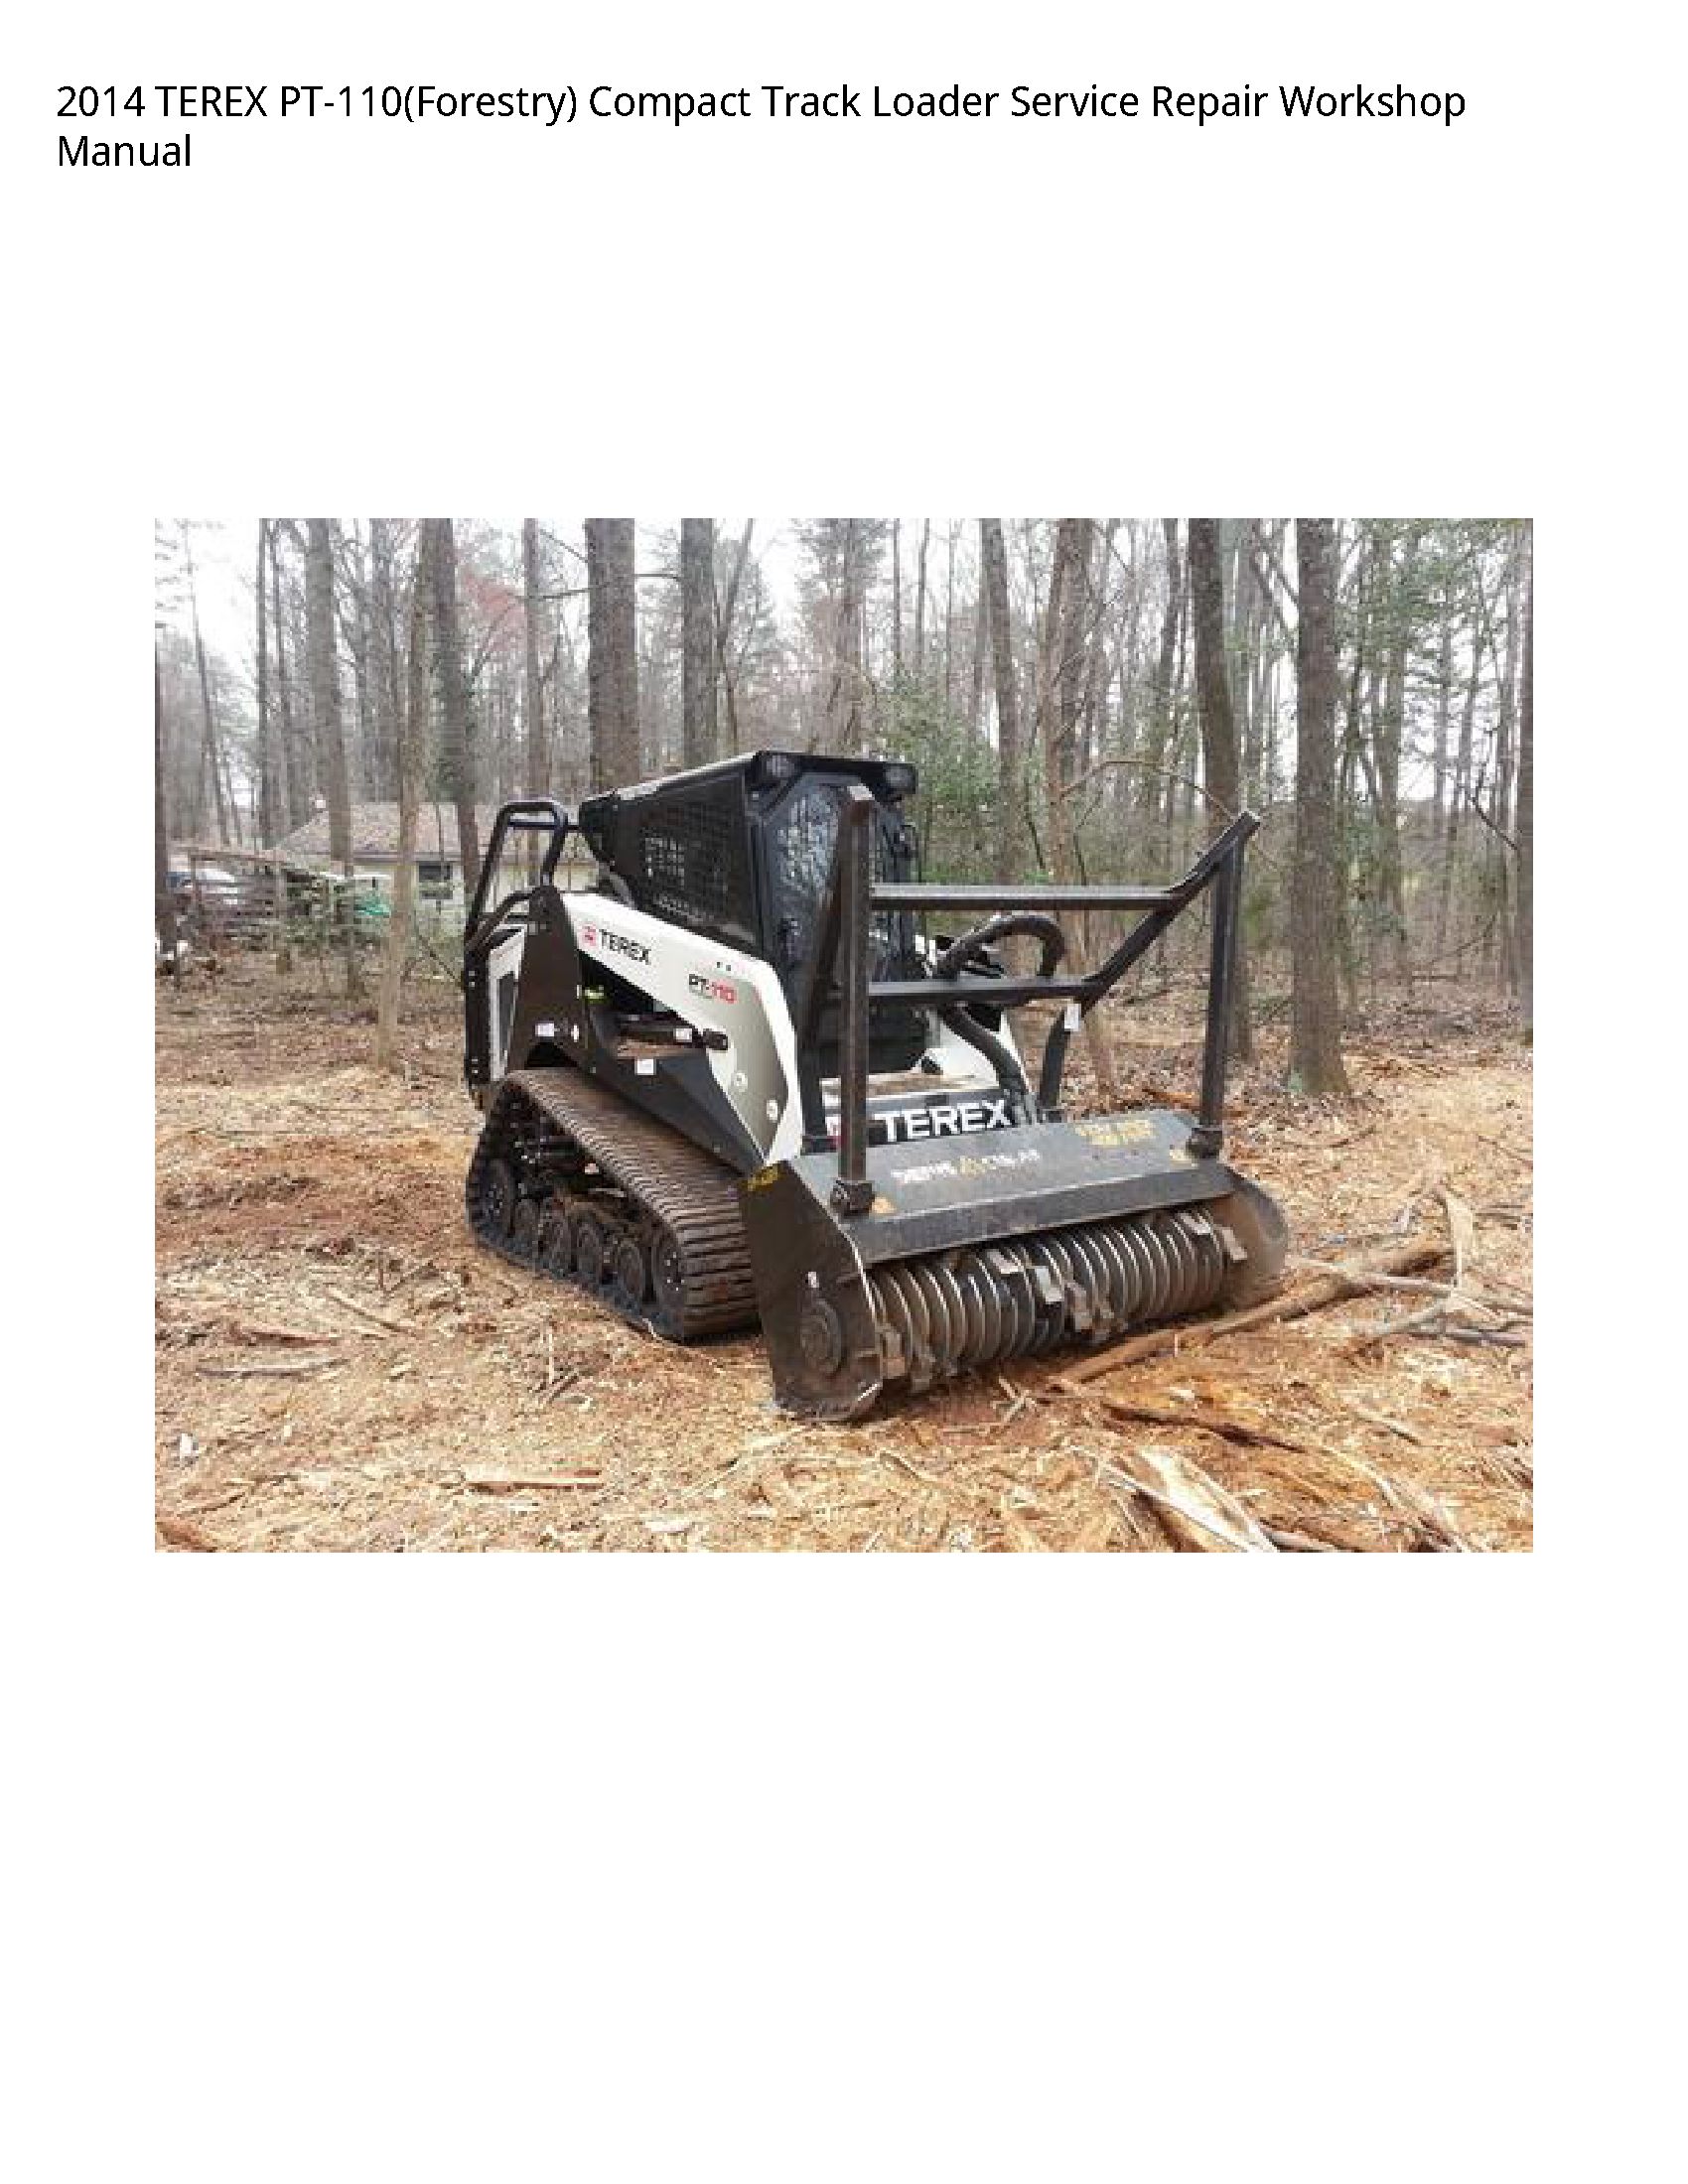 Terex PT-110(Forestry) Compact Track Loader manual